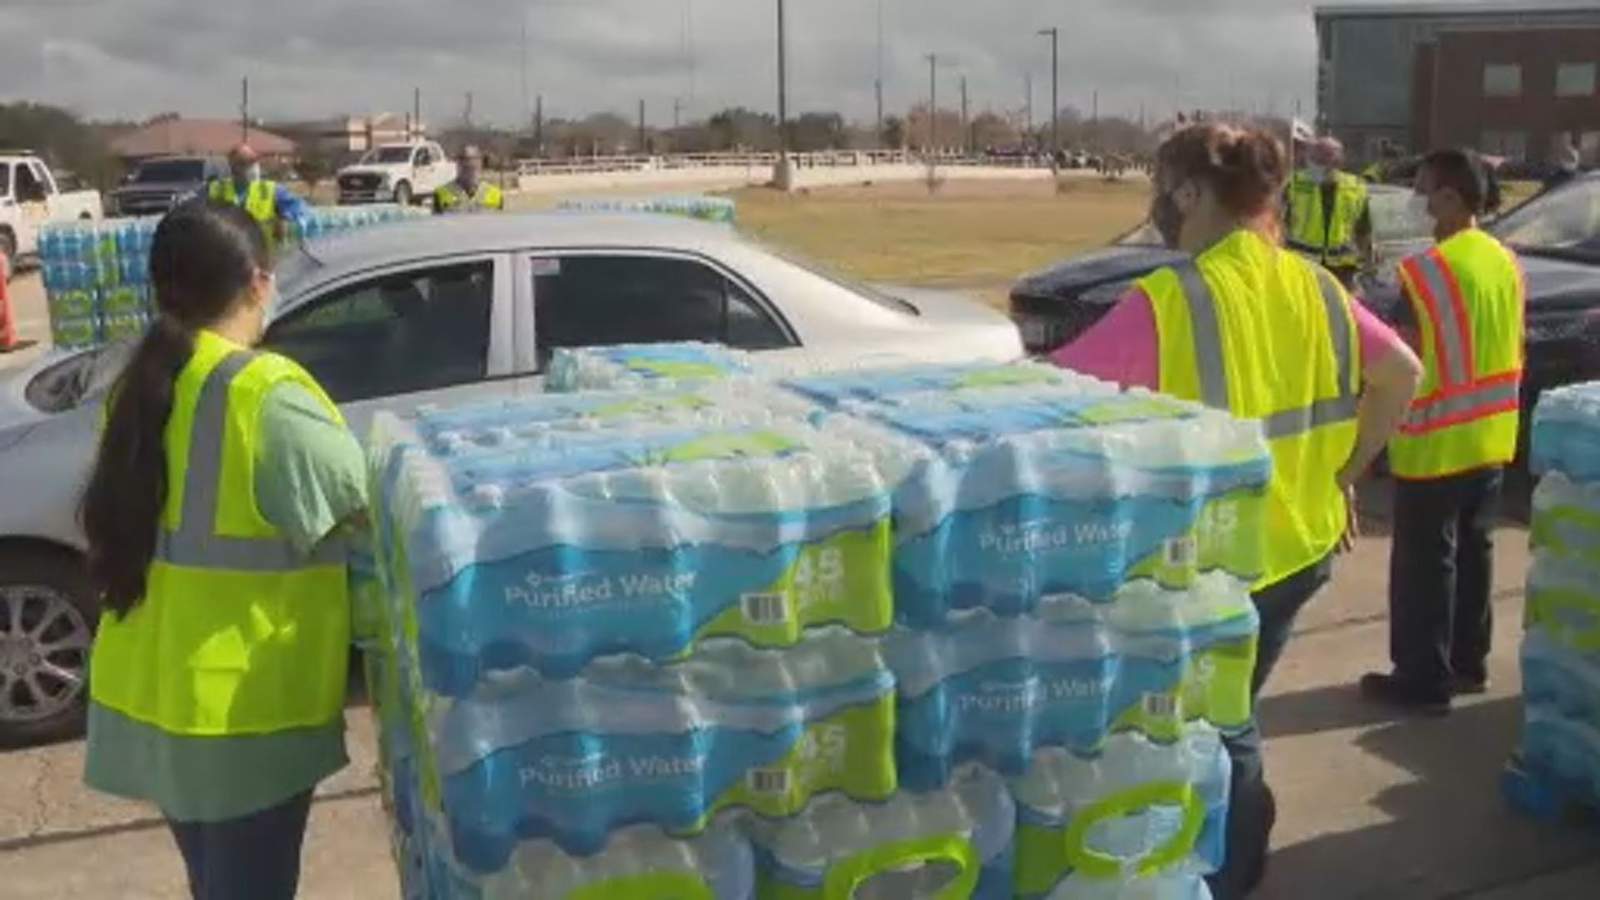 Thousands flock to food, water giveaways across Houston area